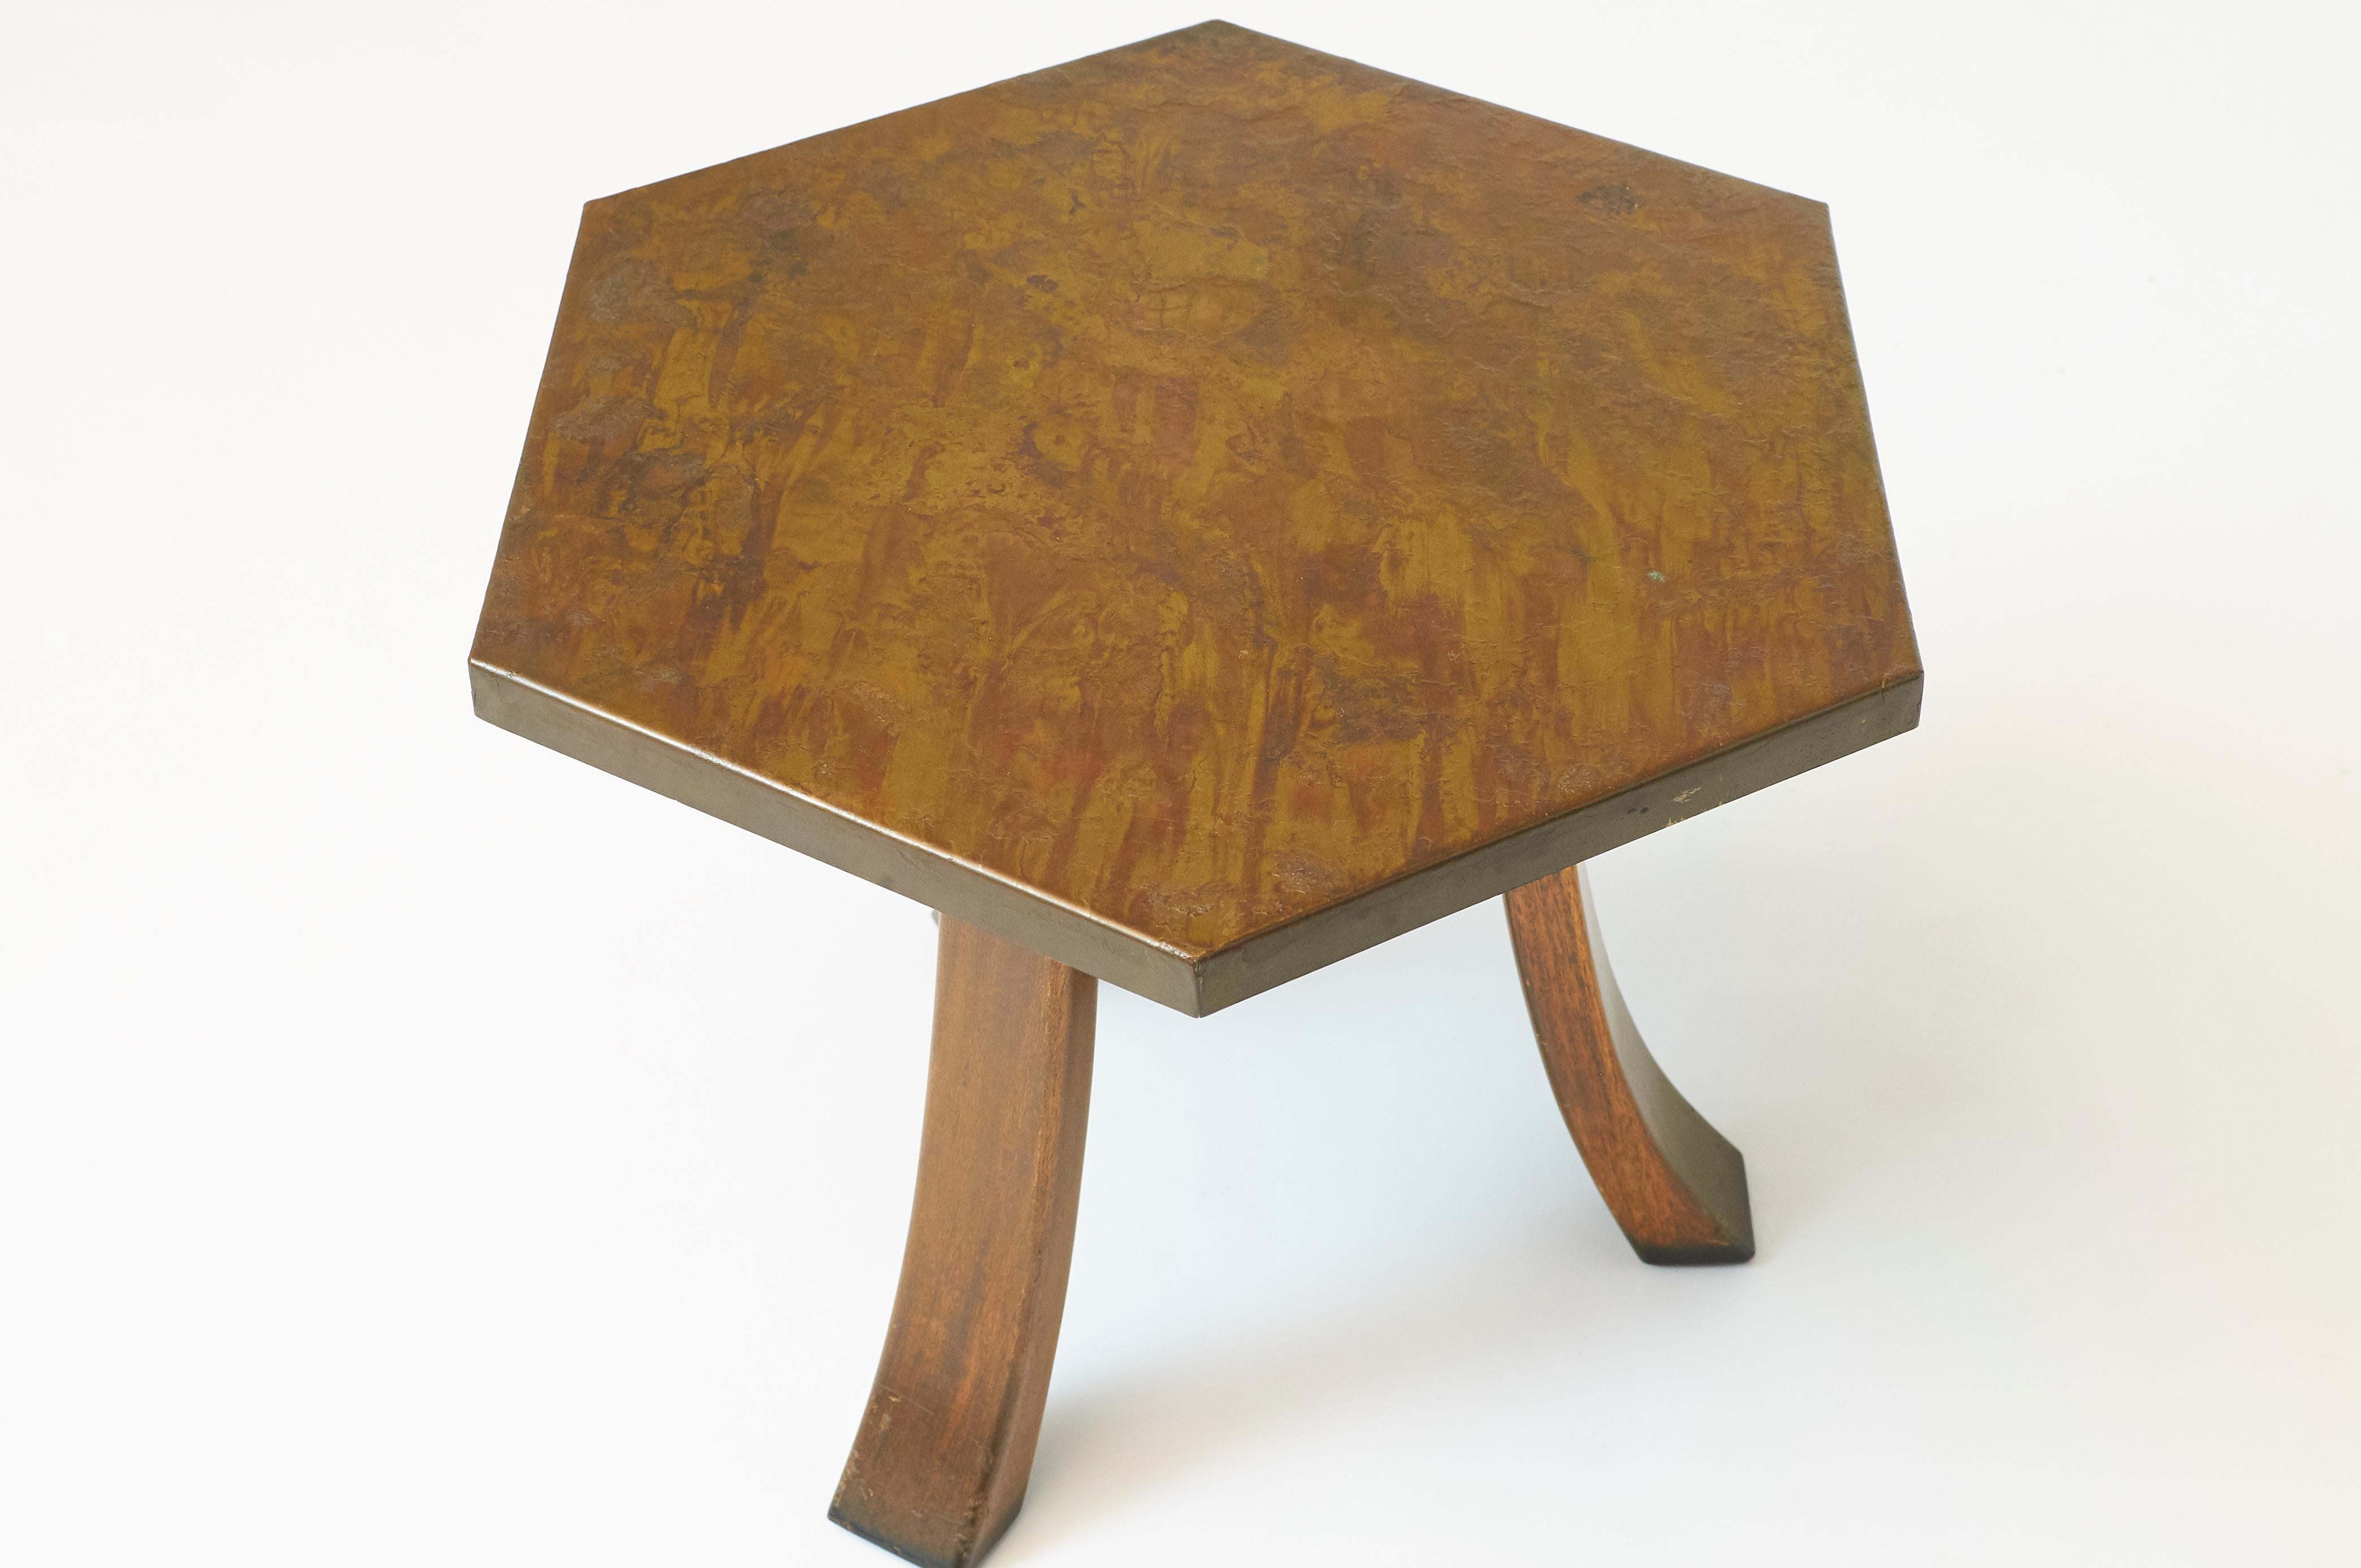 A pair of patinated bronze hexagon shaped side tables with tripod base of splayed wood legs.